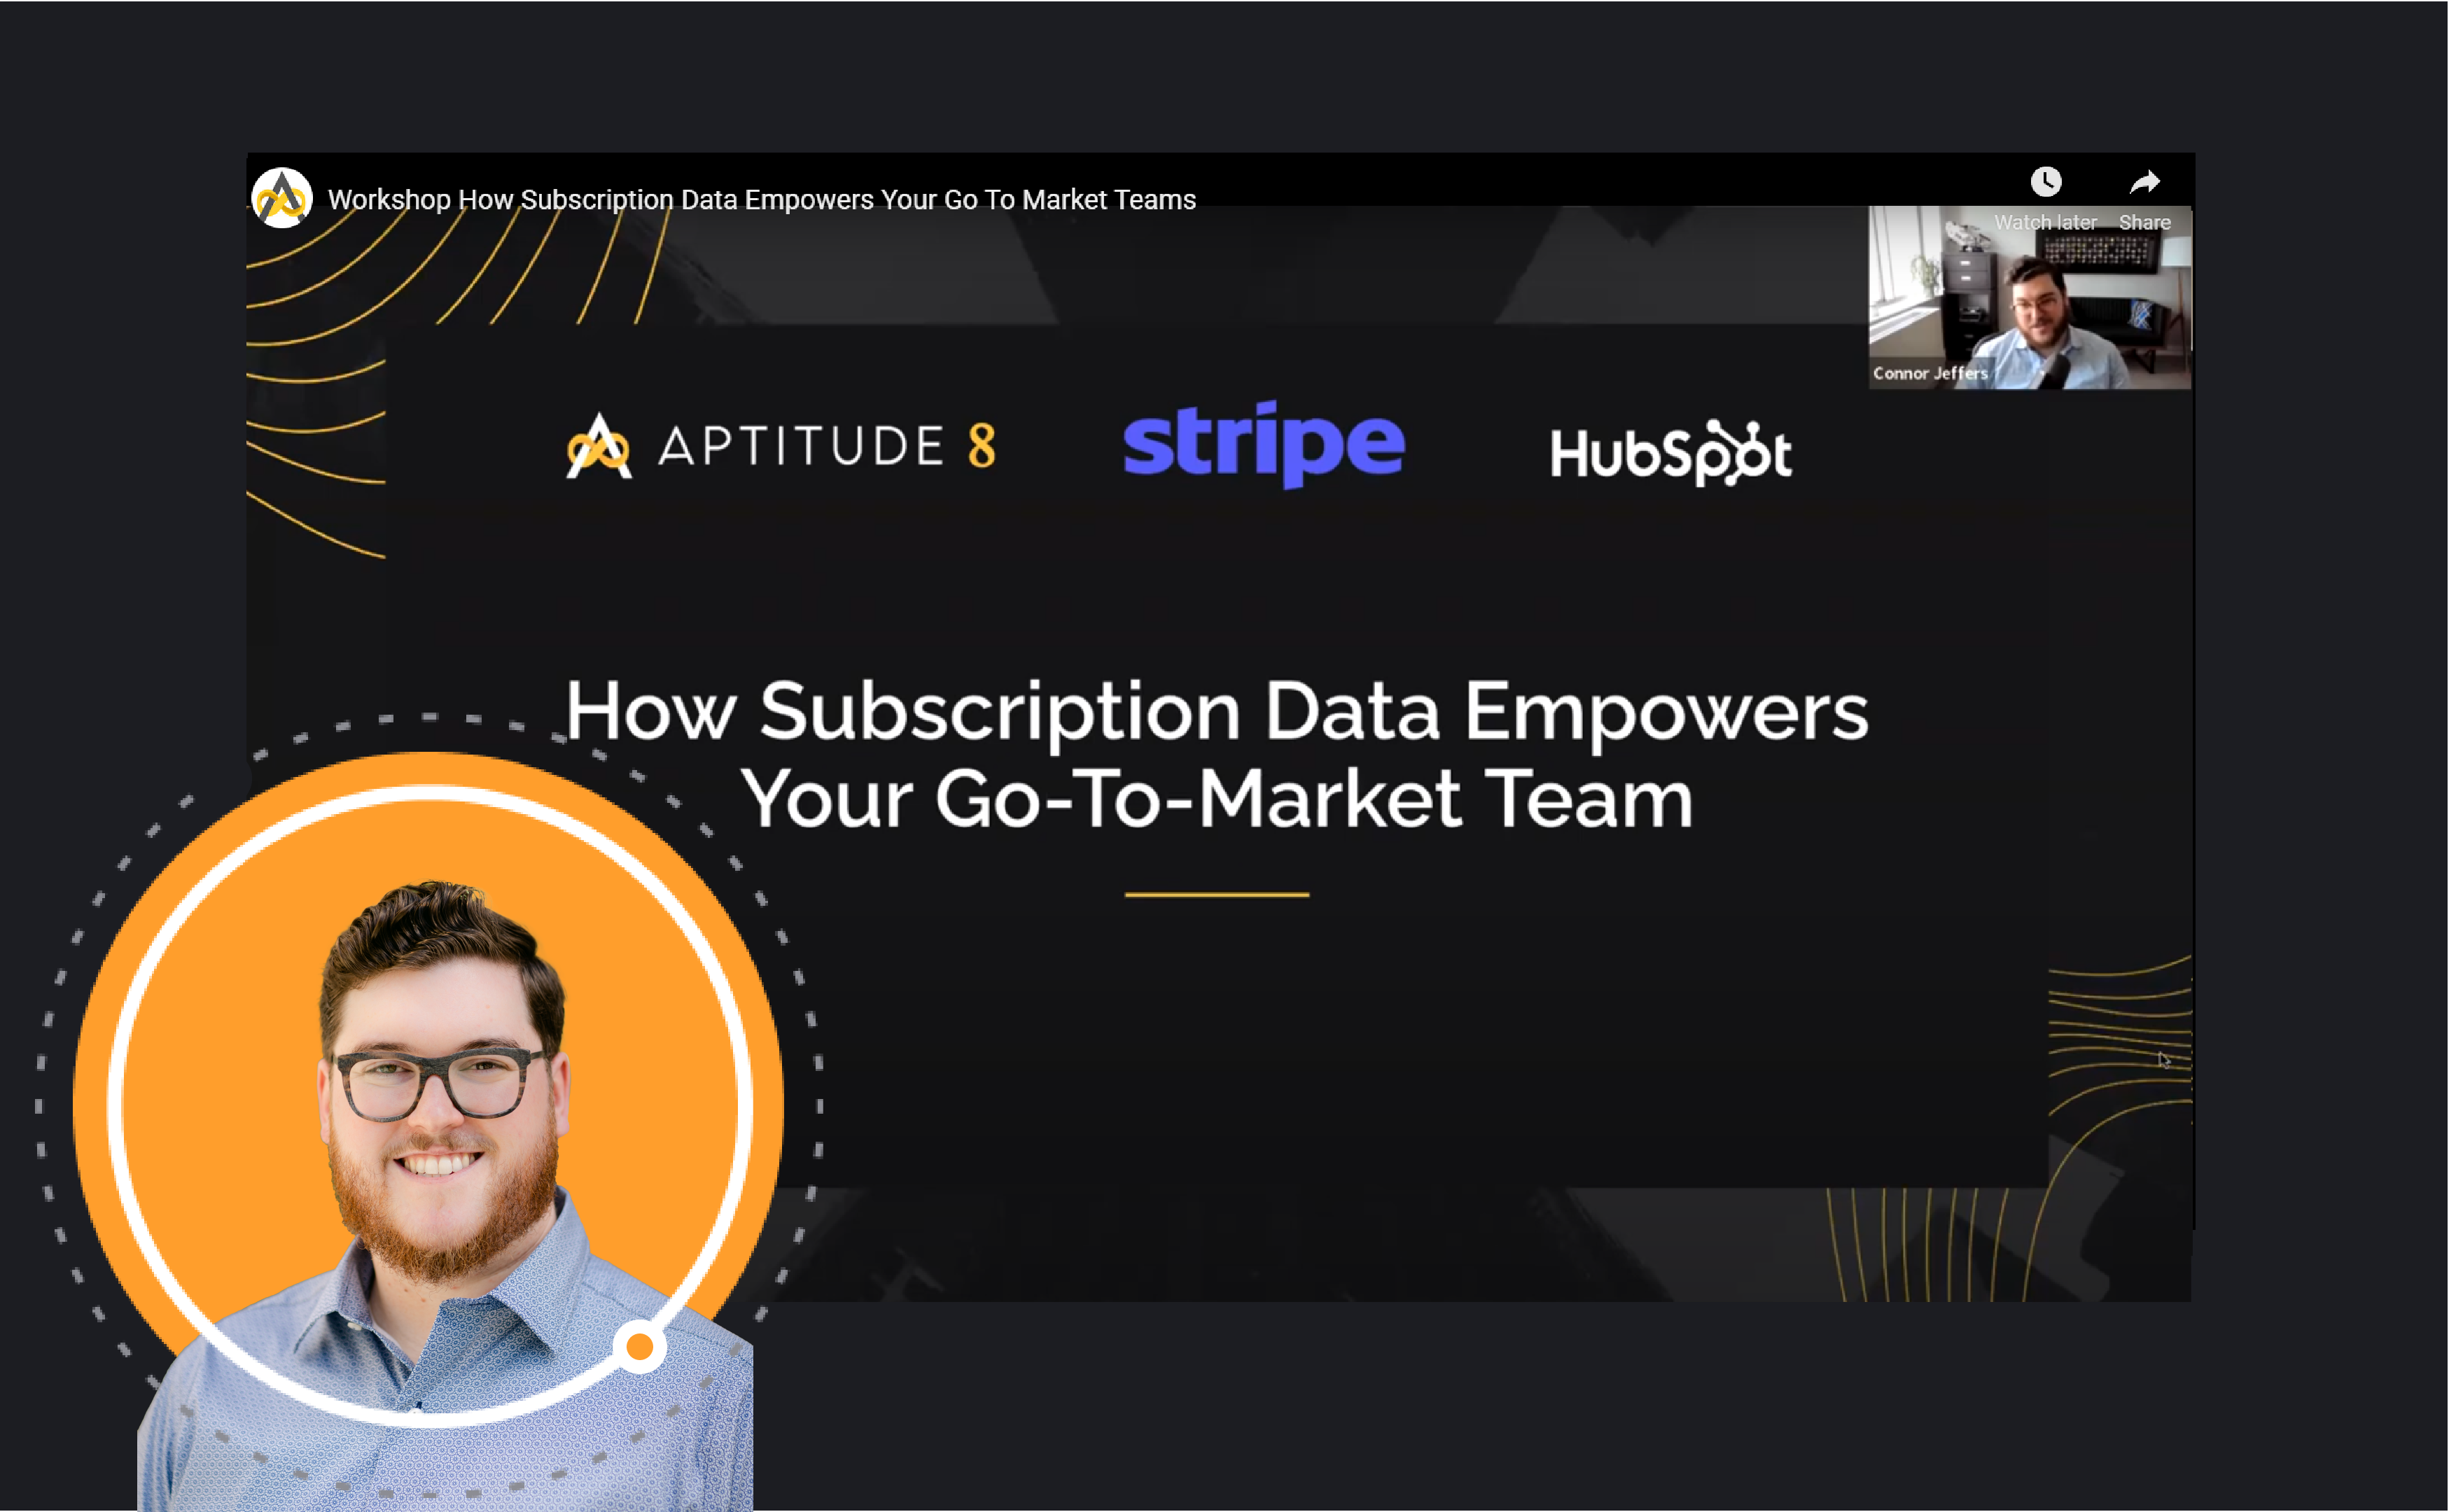 Workshop: How Subscription Data Empowers Your Go-To-Market Teams